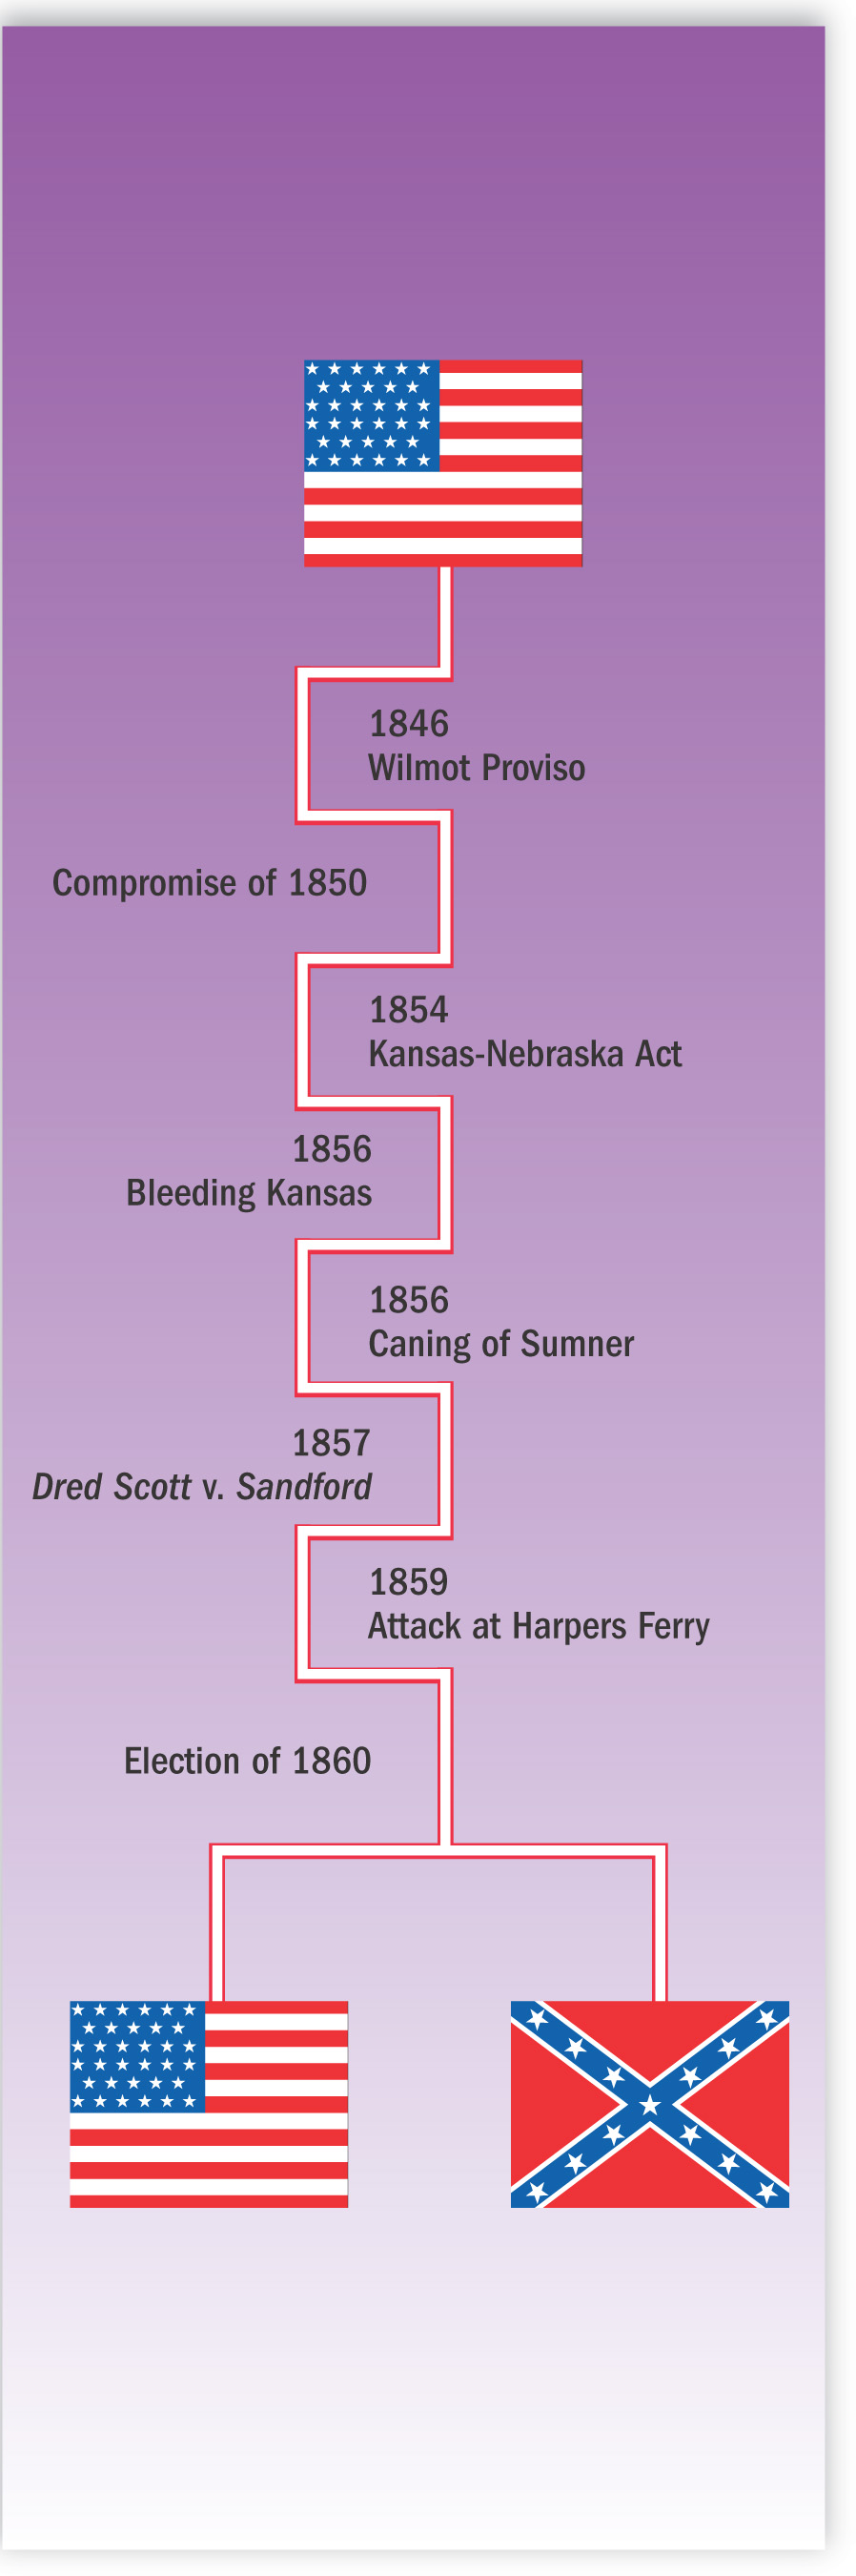 A timeline of events from 1846 to 1860.